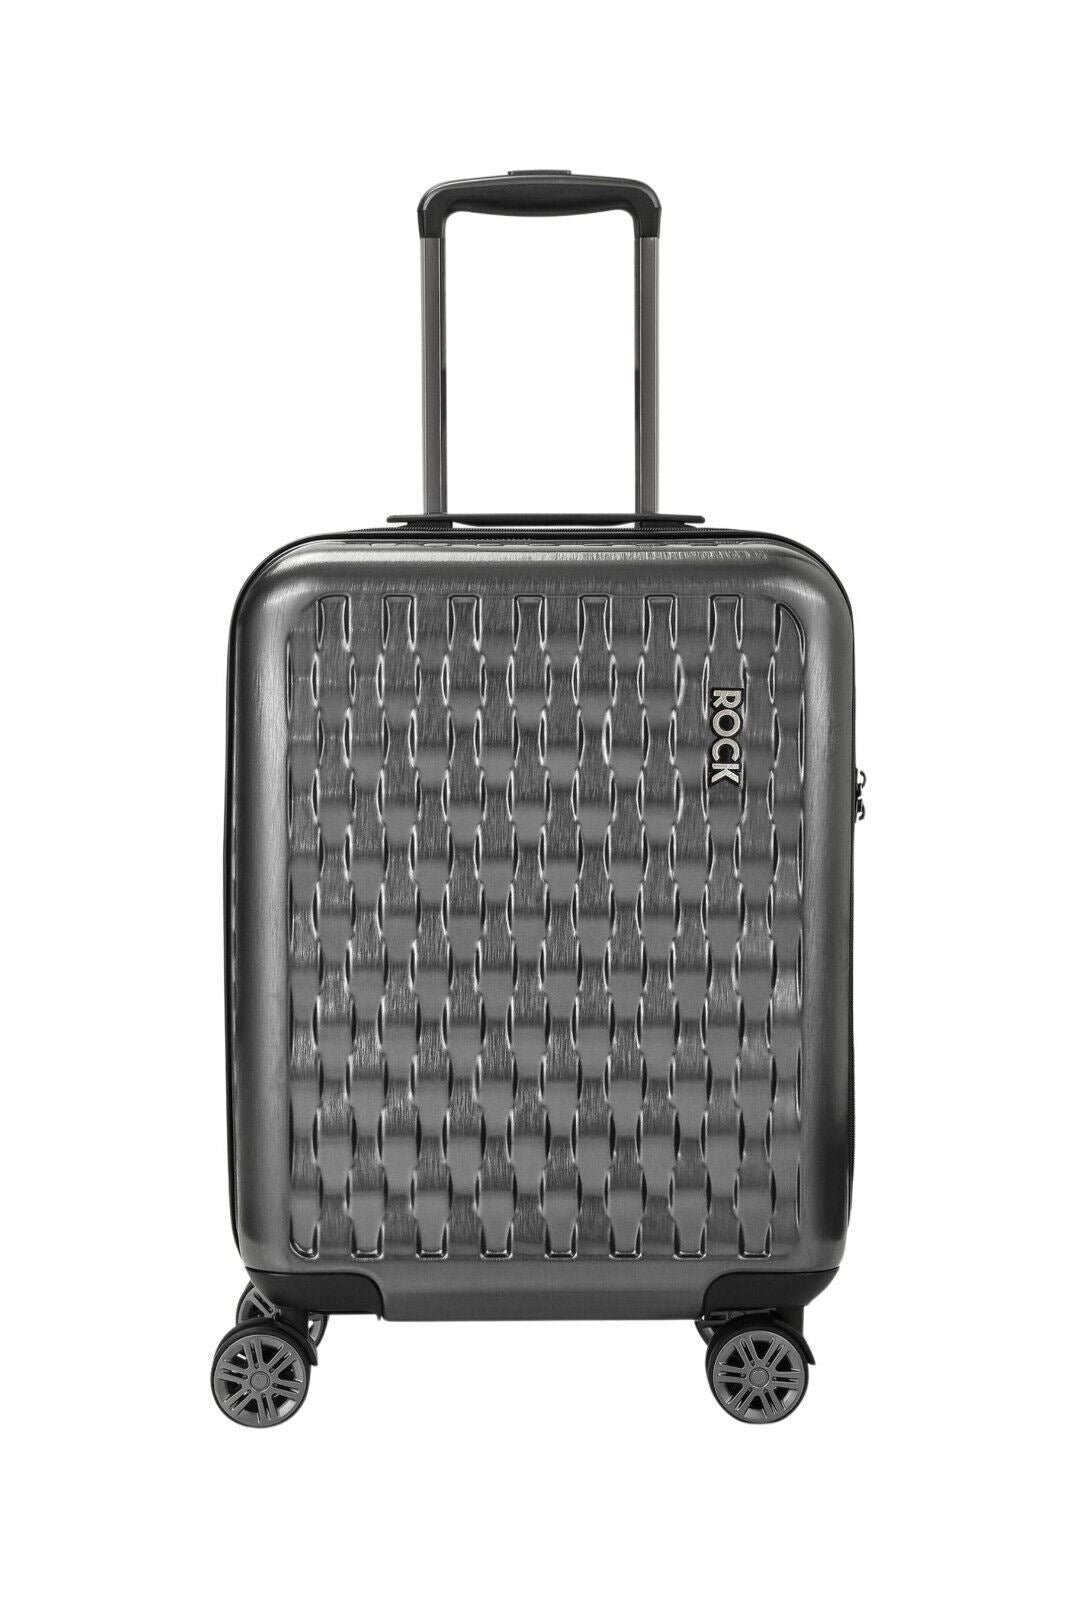 Hard Shell Suitcase 8 Wheel Luggage Trolley Case Holiday Travel Bag - Upperclass Fashions 